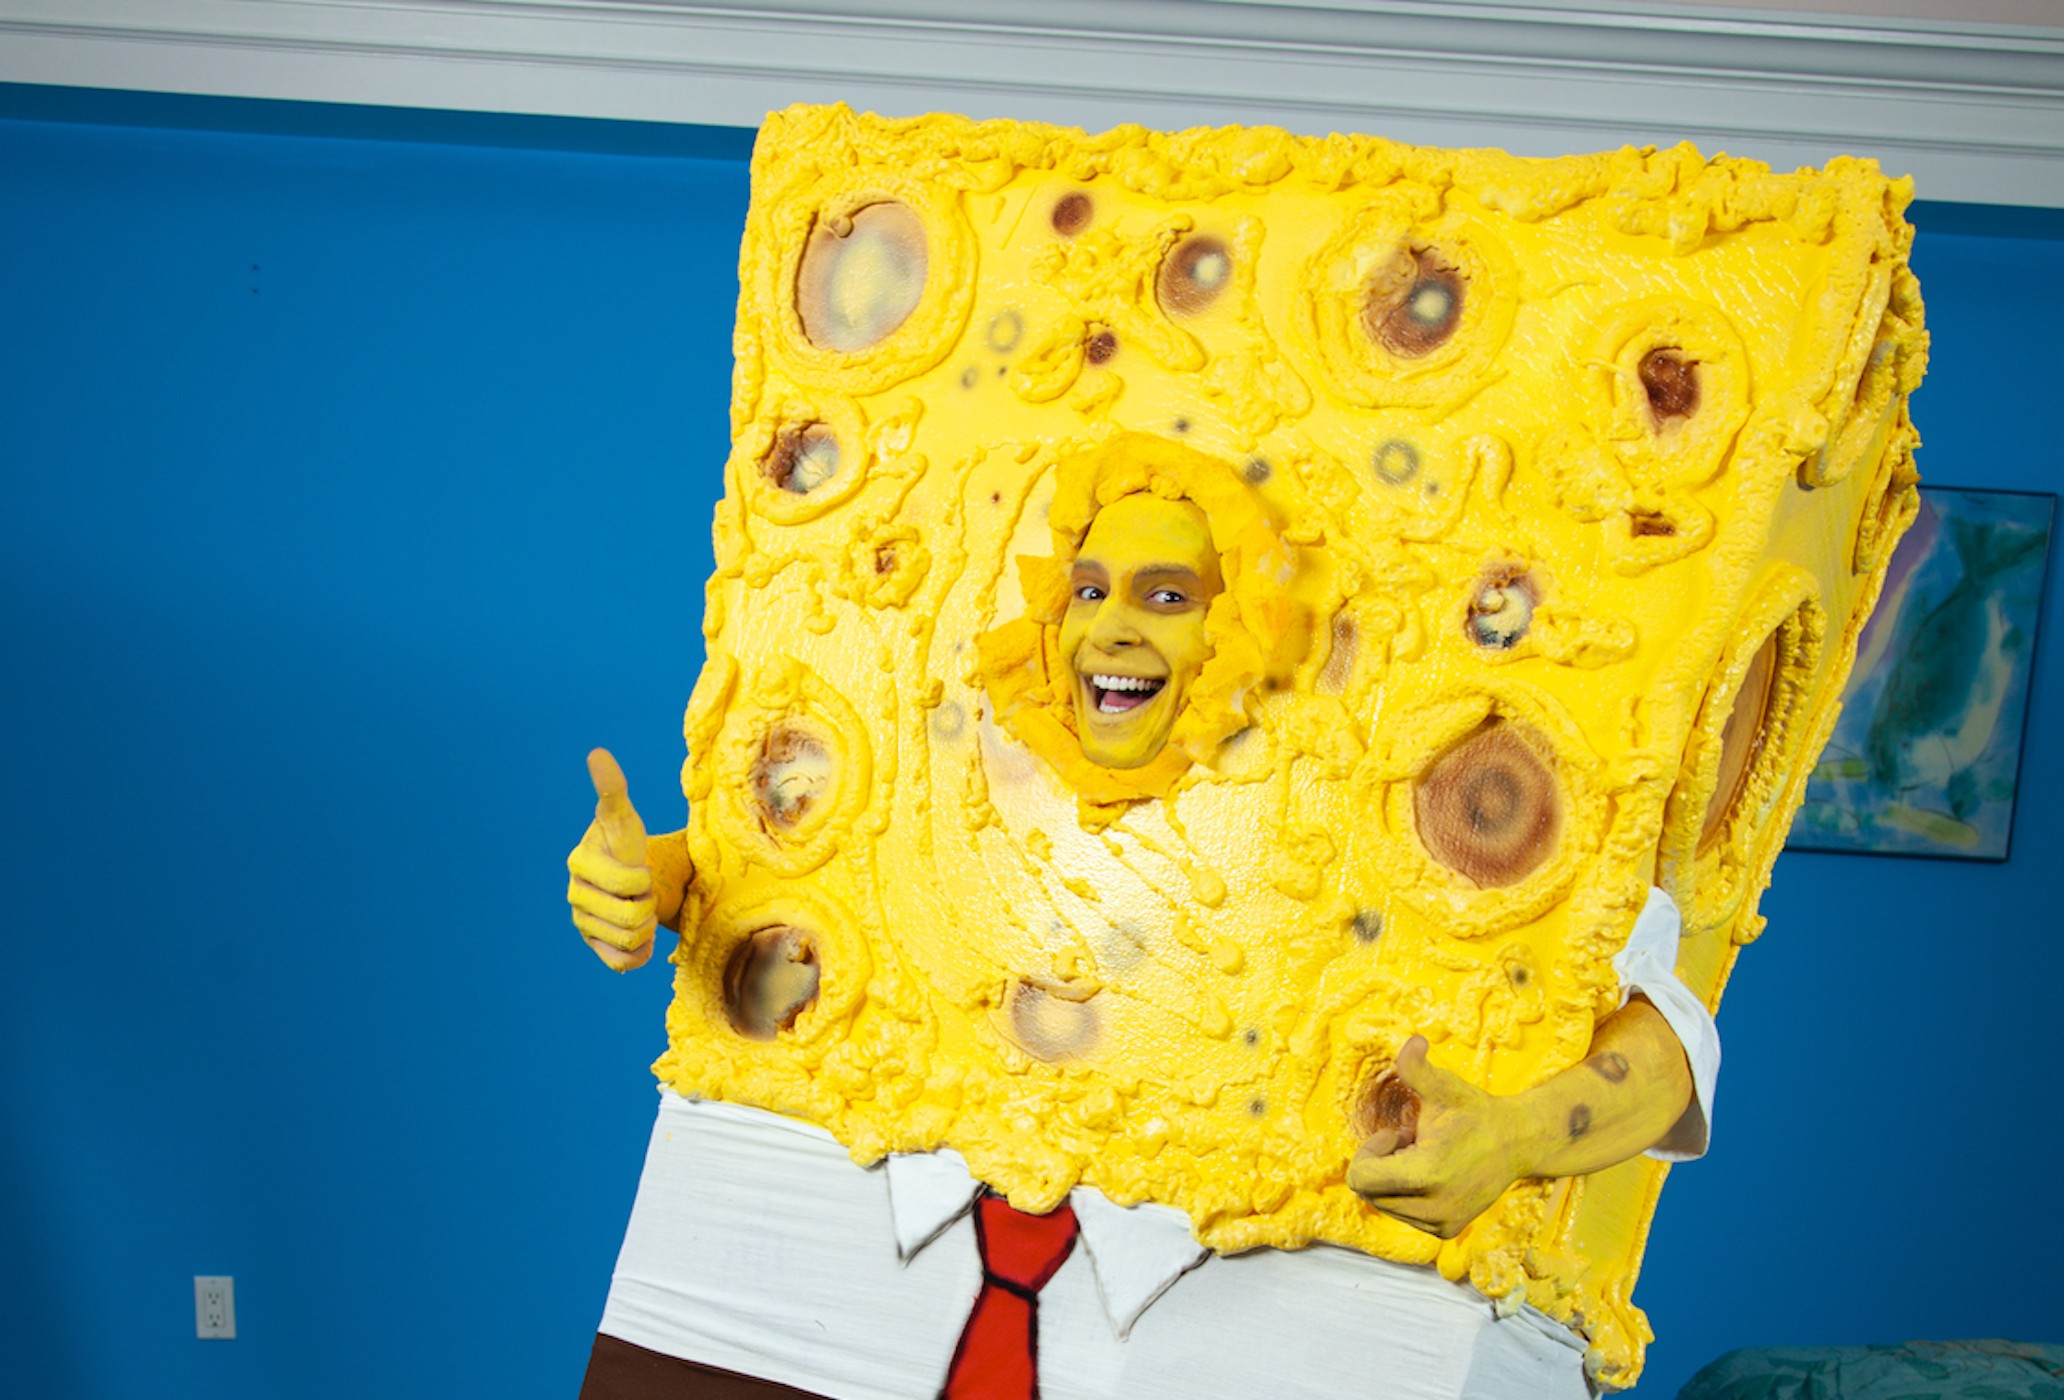 Spongebob Porn Parody Cast - WoodRocket Is Making Parody Porn Out of Your Favorite Childhood Characters